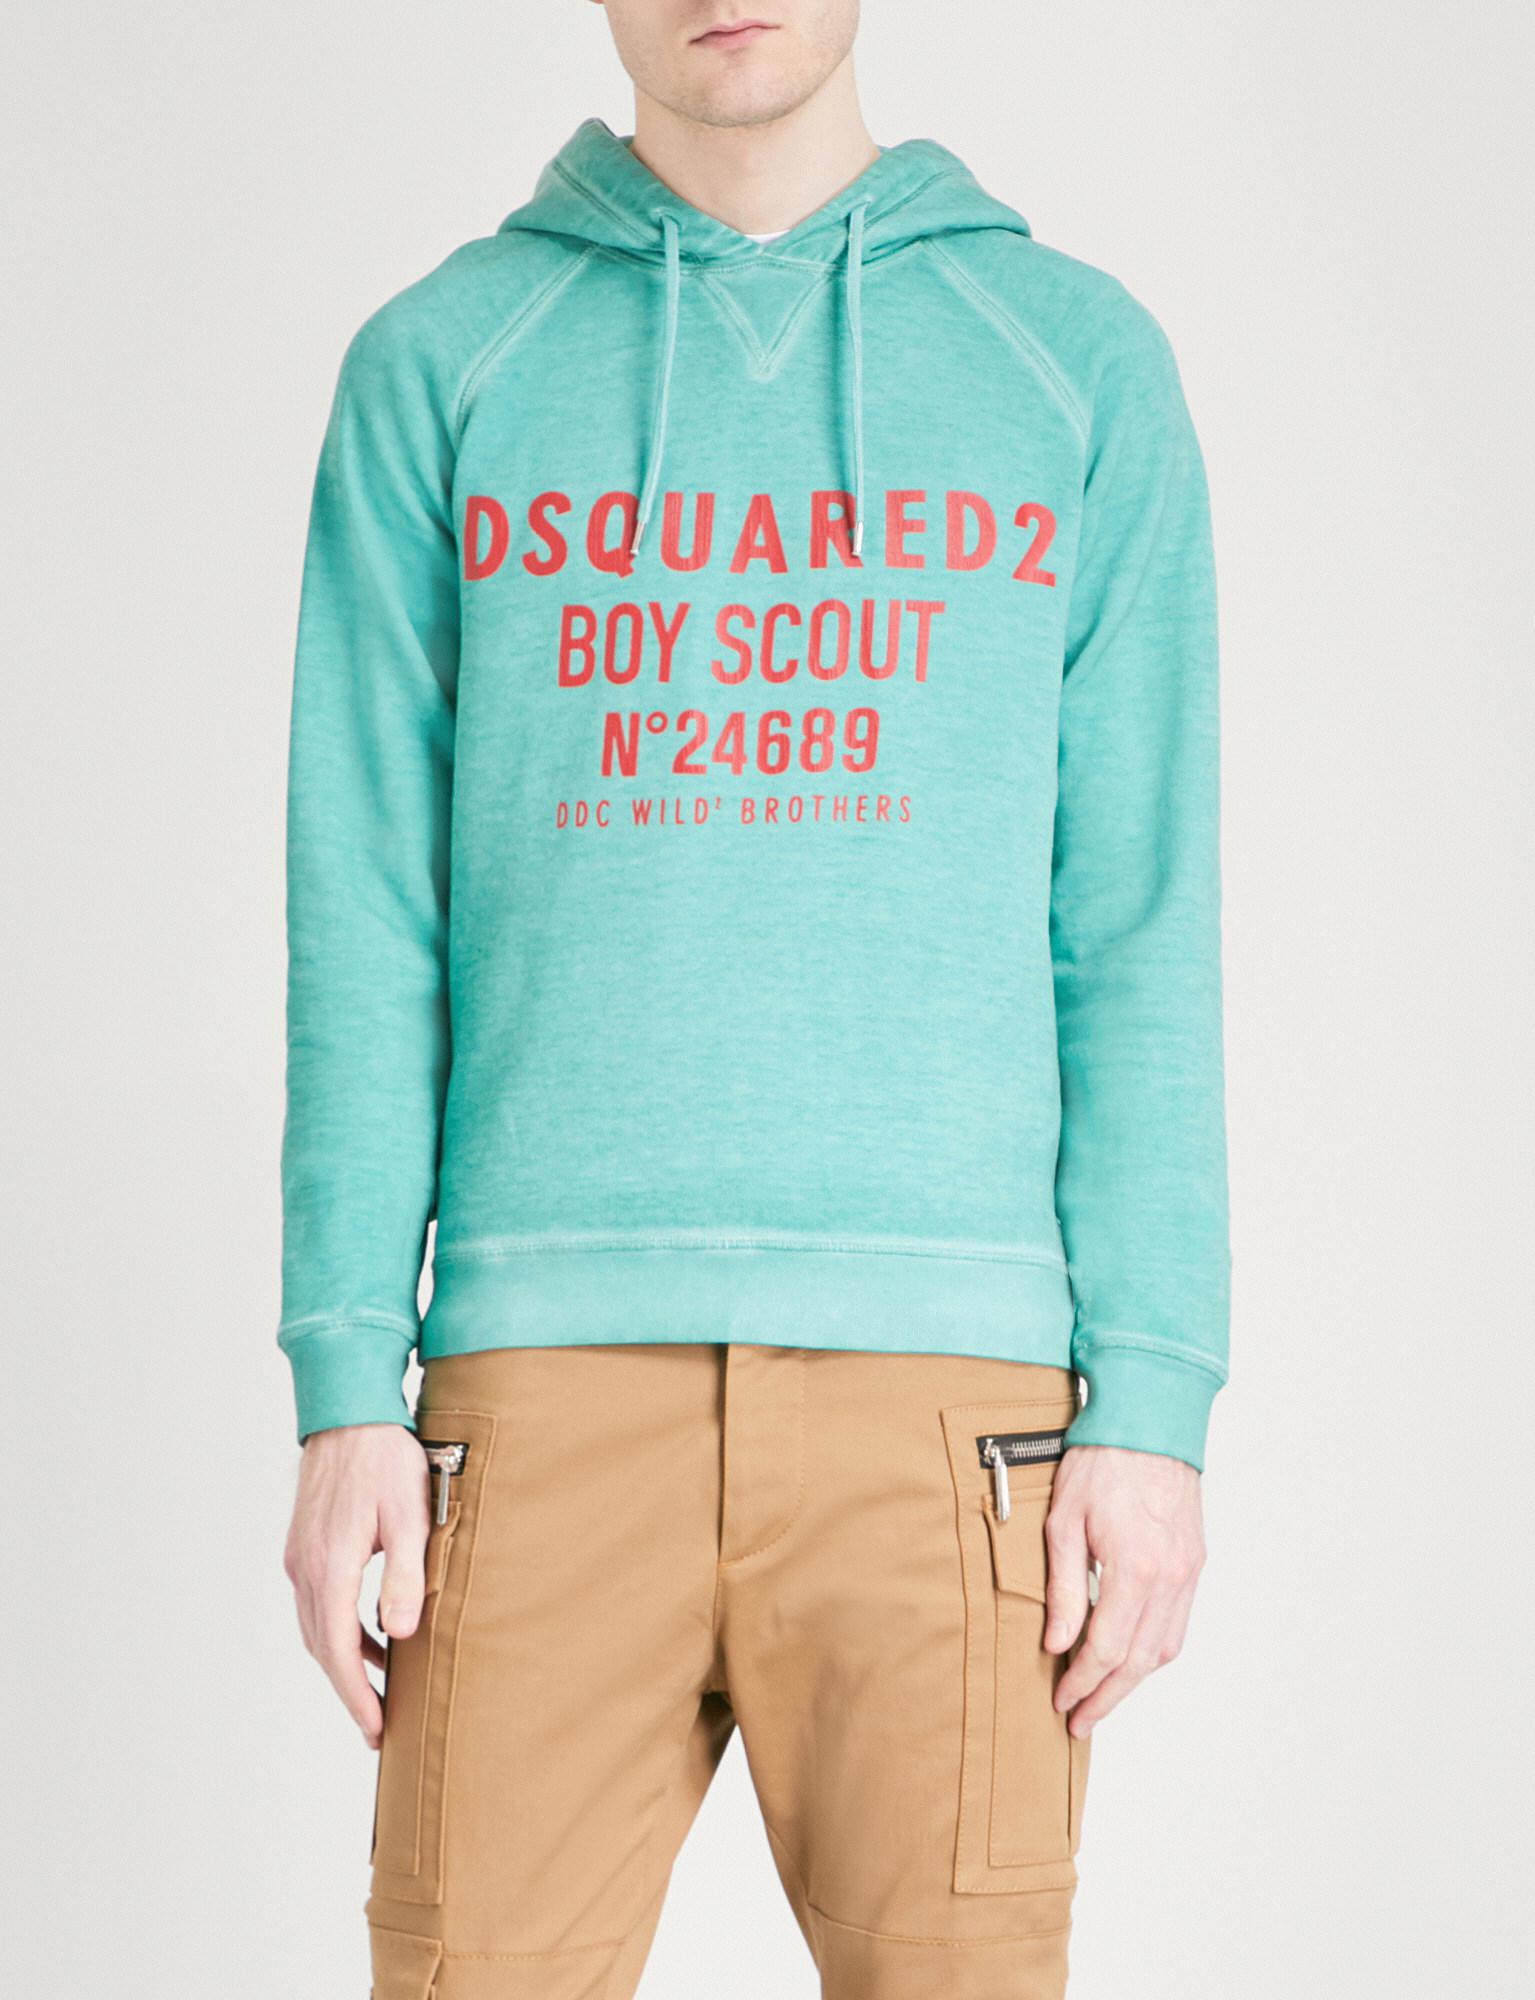 DSquared² Boy Scout Cotton Hoody in Blue for Men - Lyst